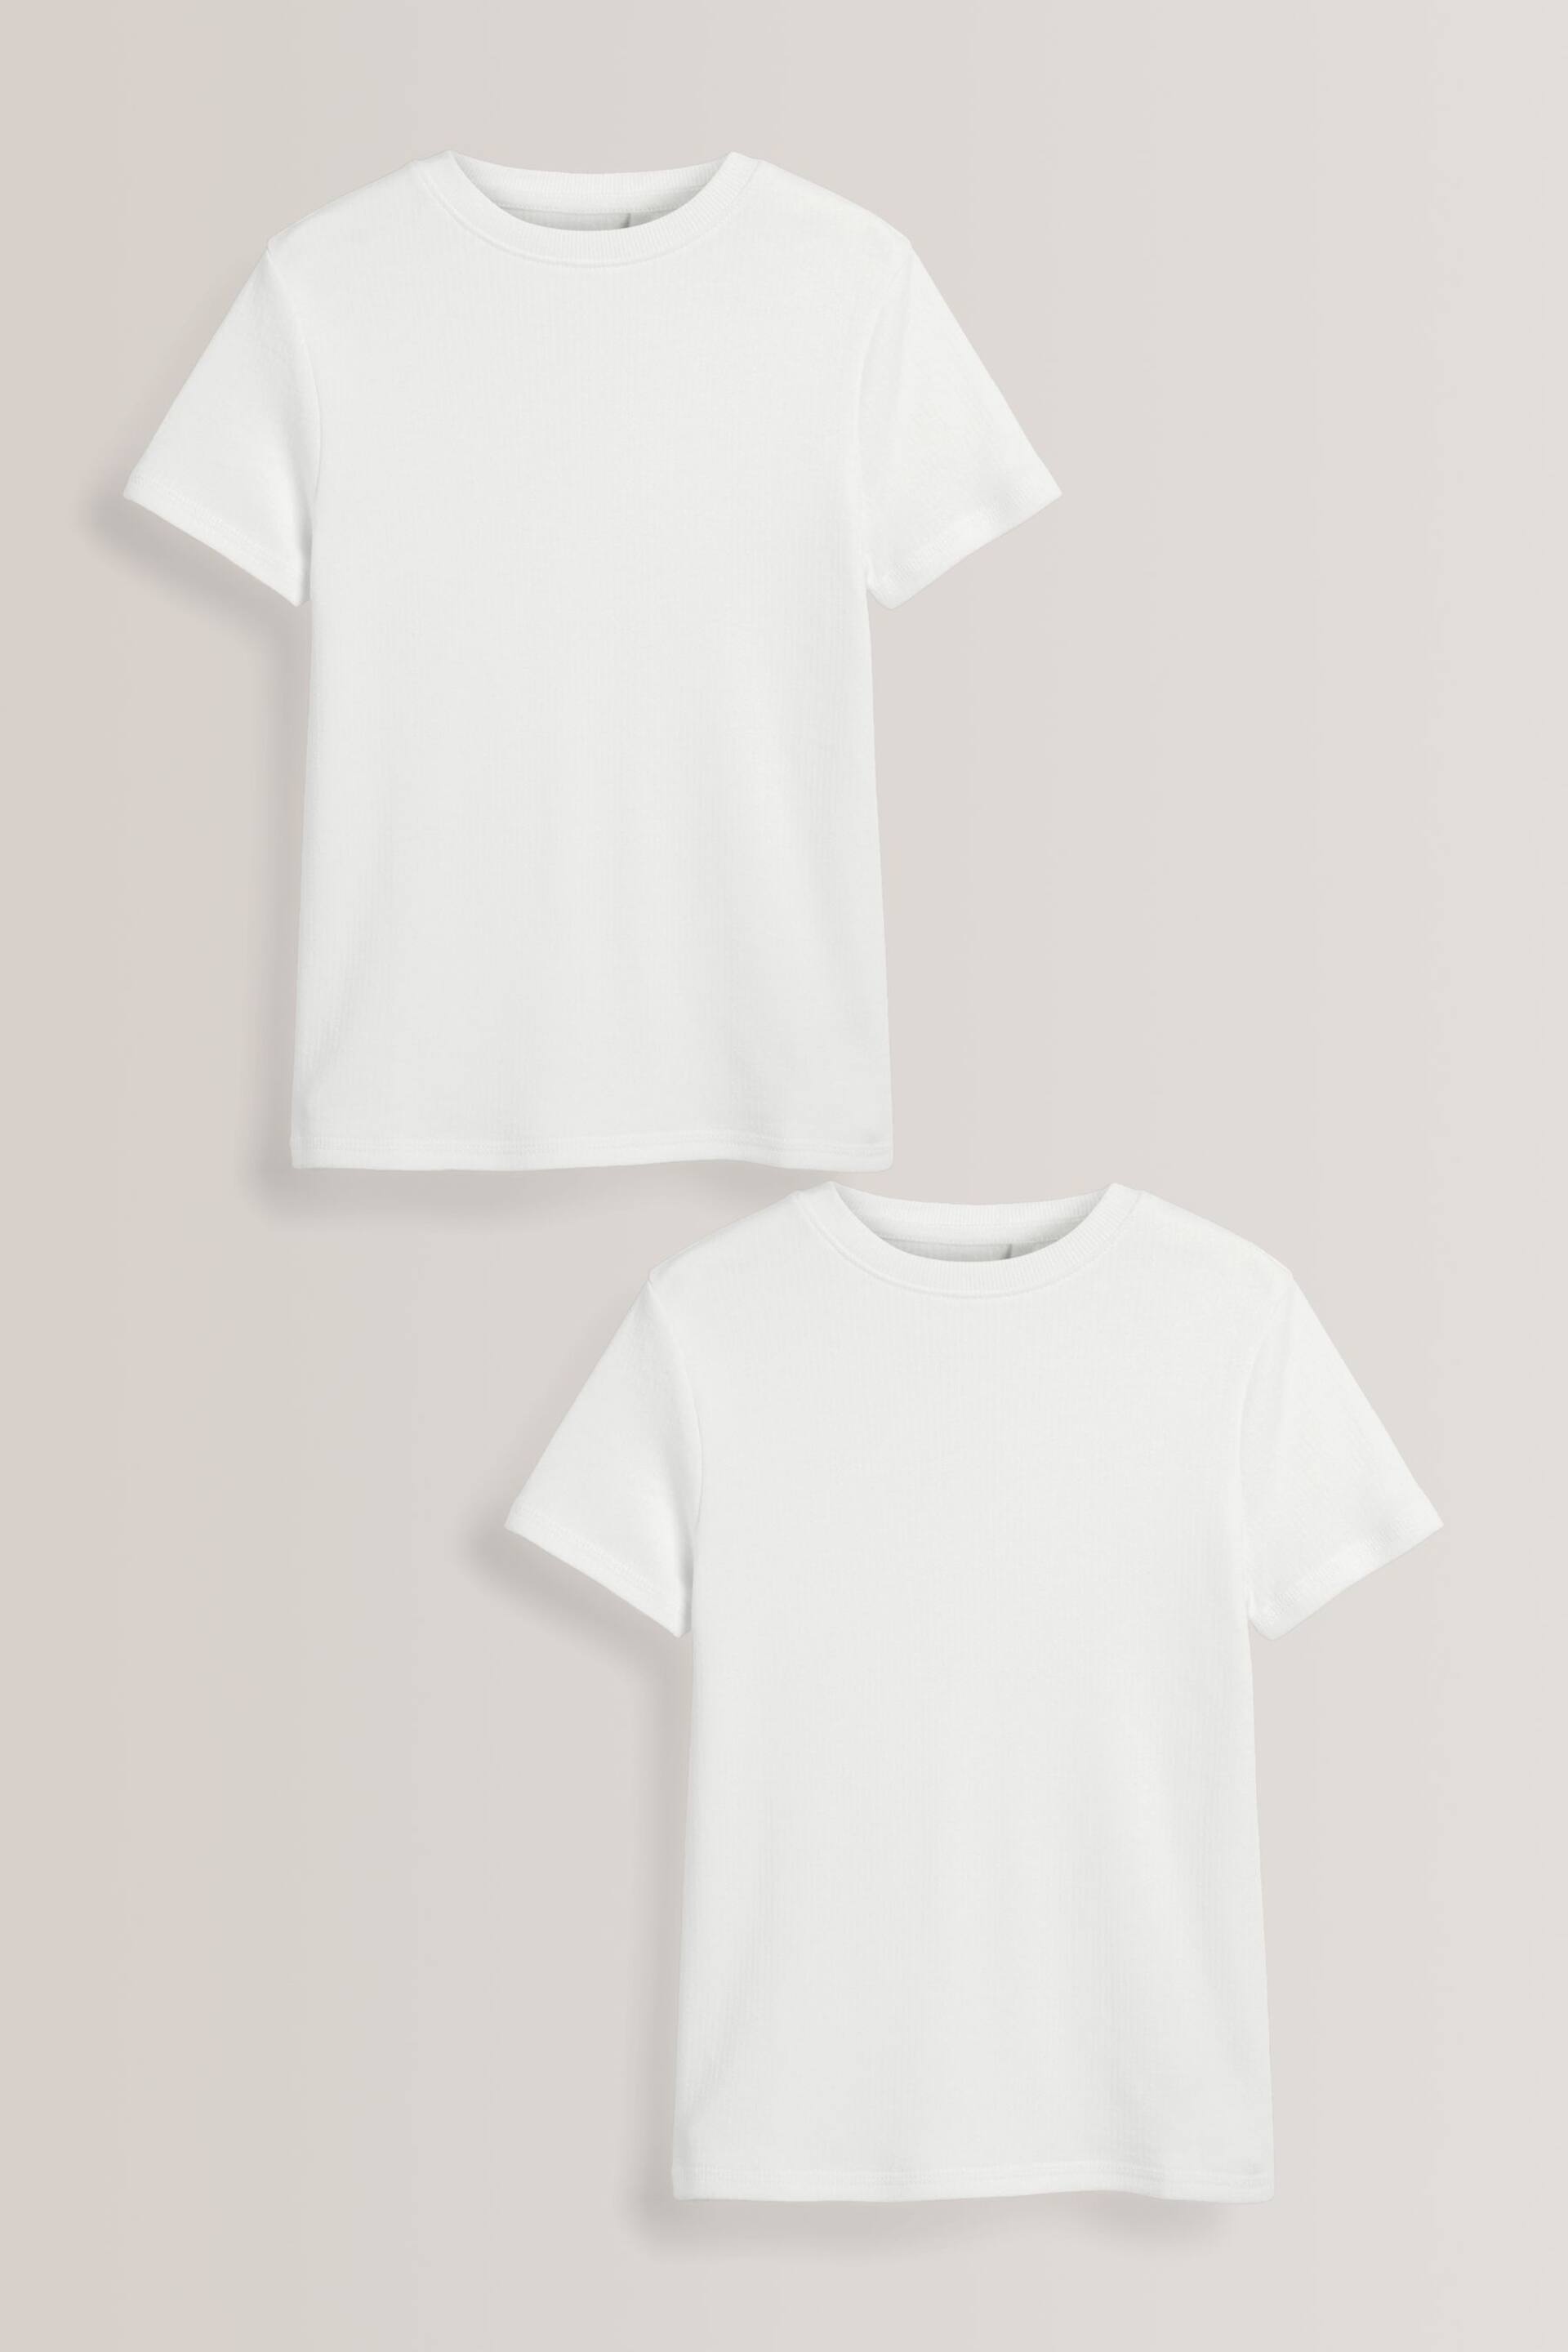 White 2 Pack Short Sleeved Thermal Tops (2-16yrs) - Image 1 of 4